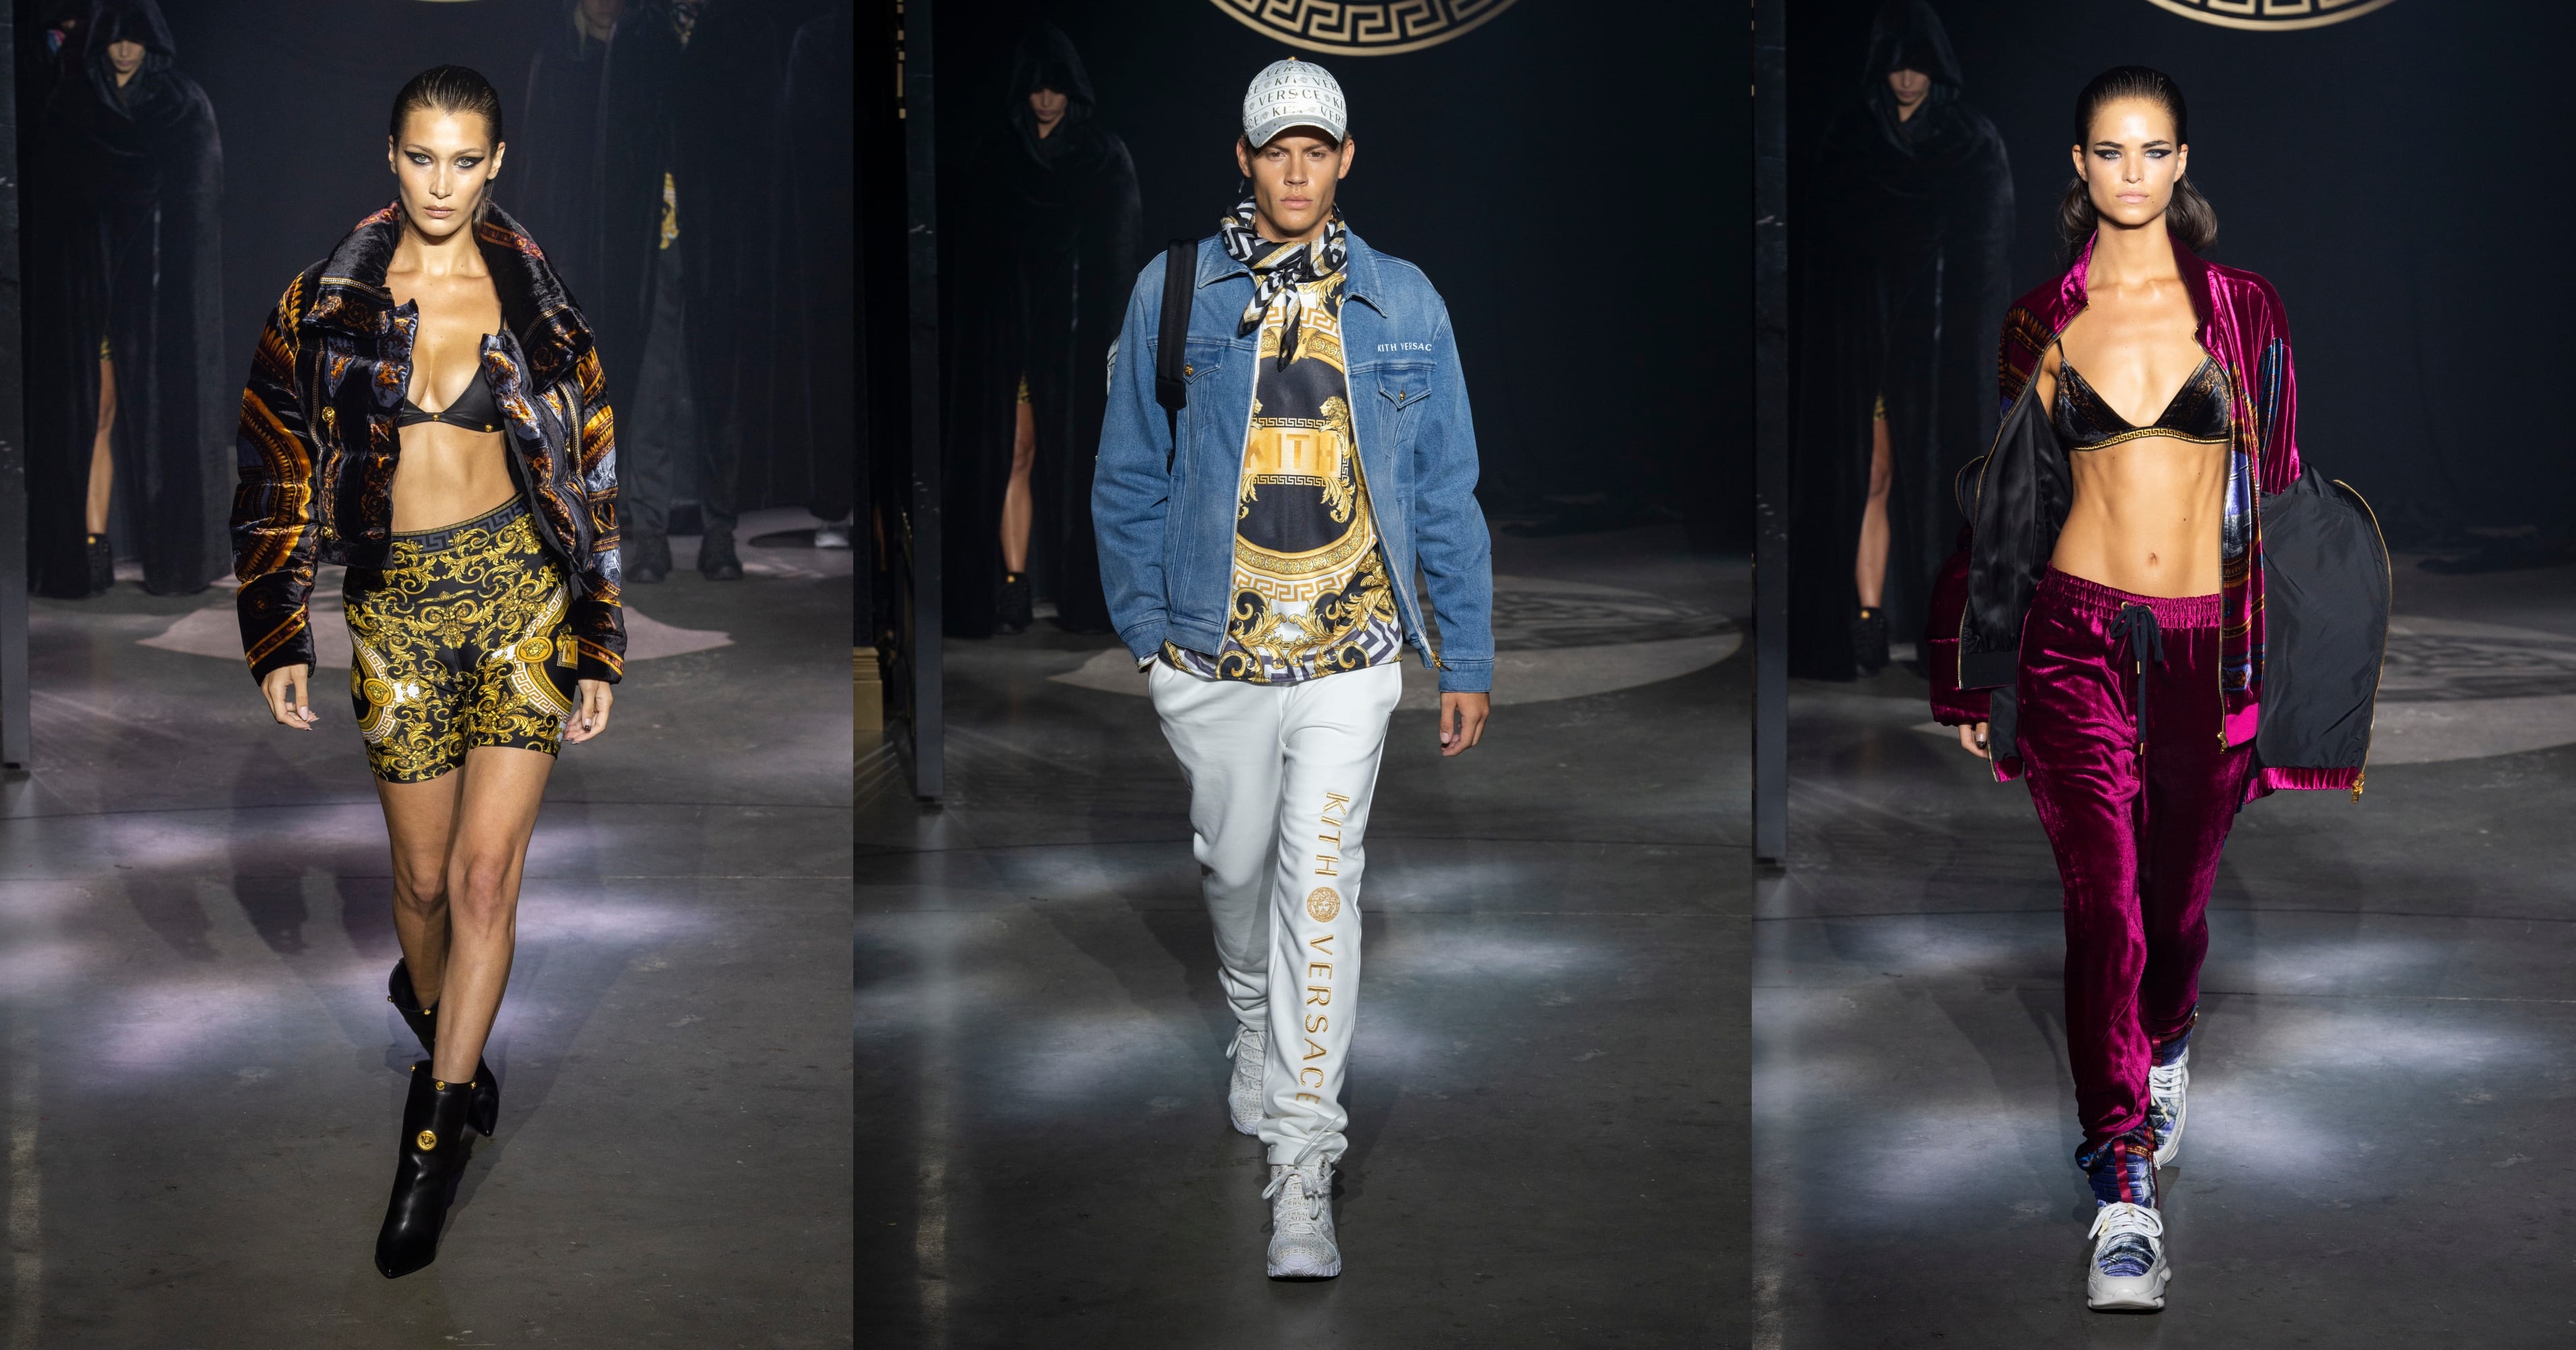 KITH and Versace Debut Their Collaborative Collection at NYFW